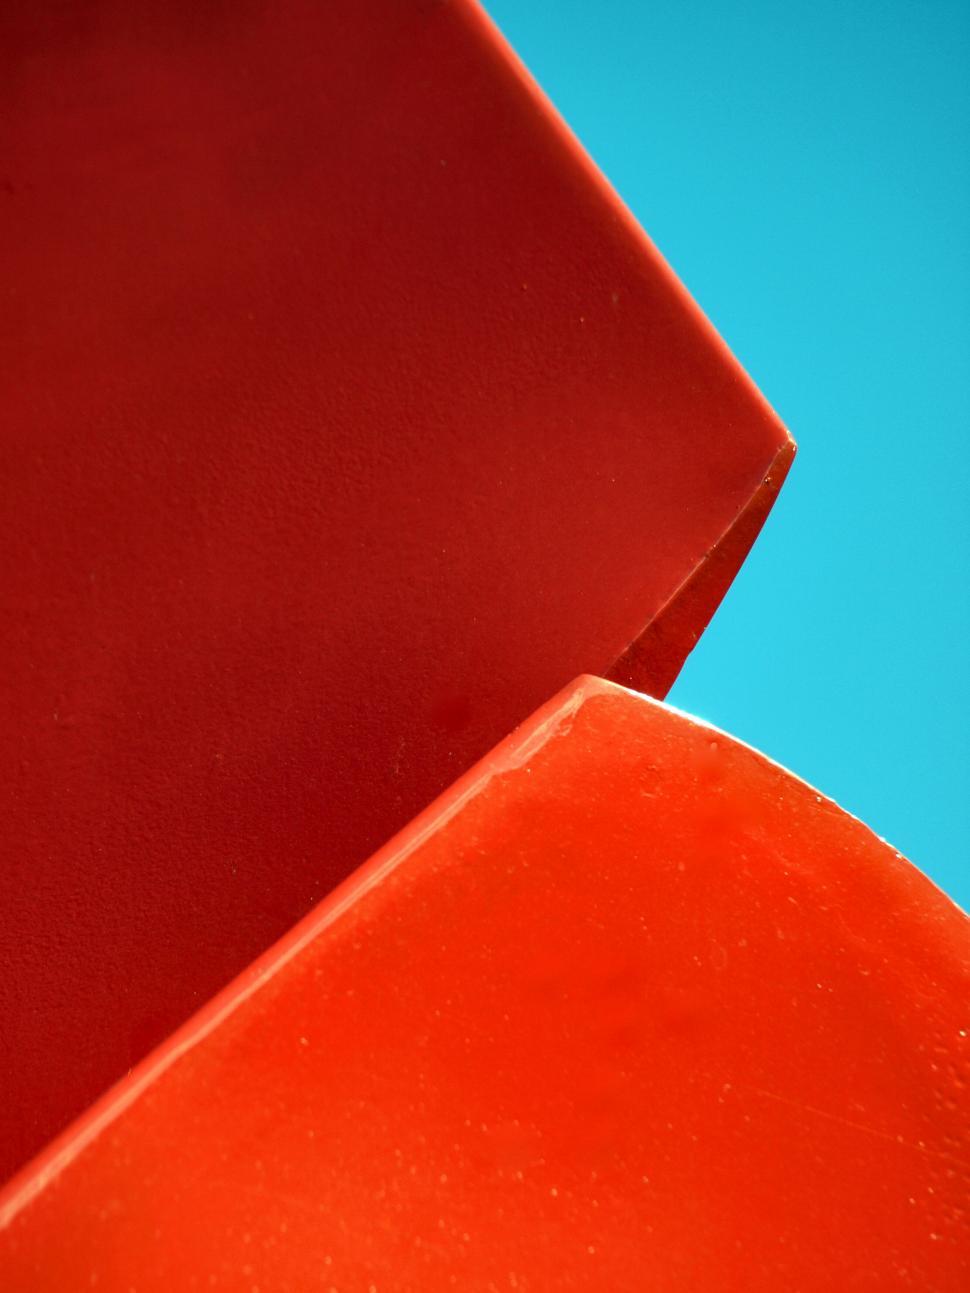 Free Image of Abstract red geometric shapes against blue sky 